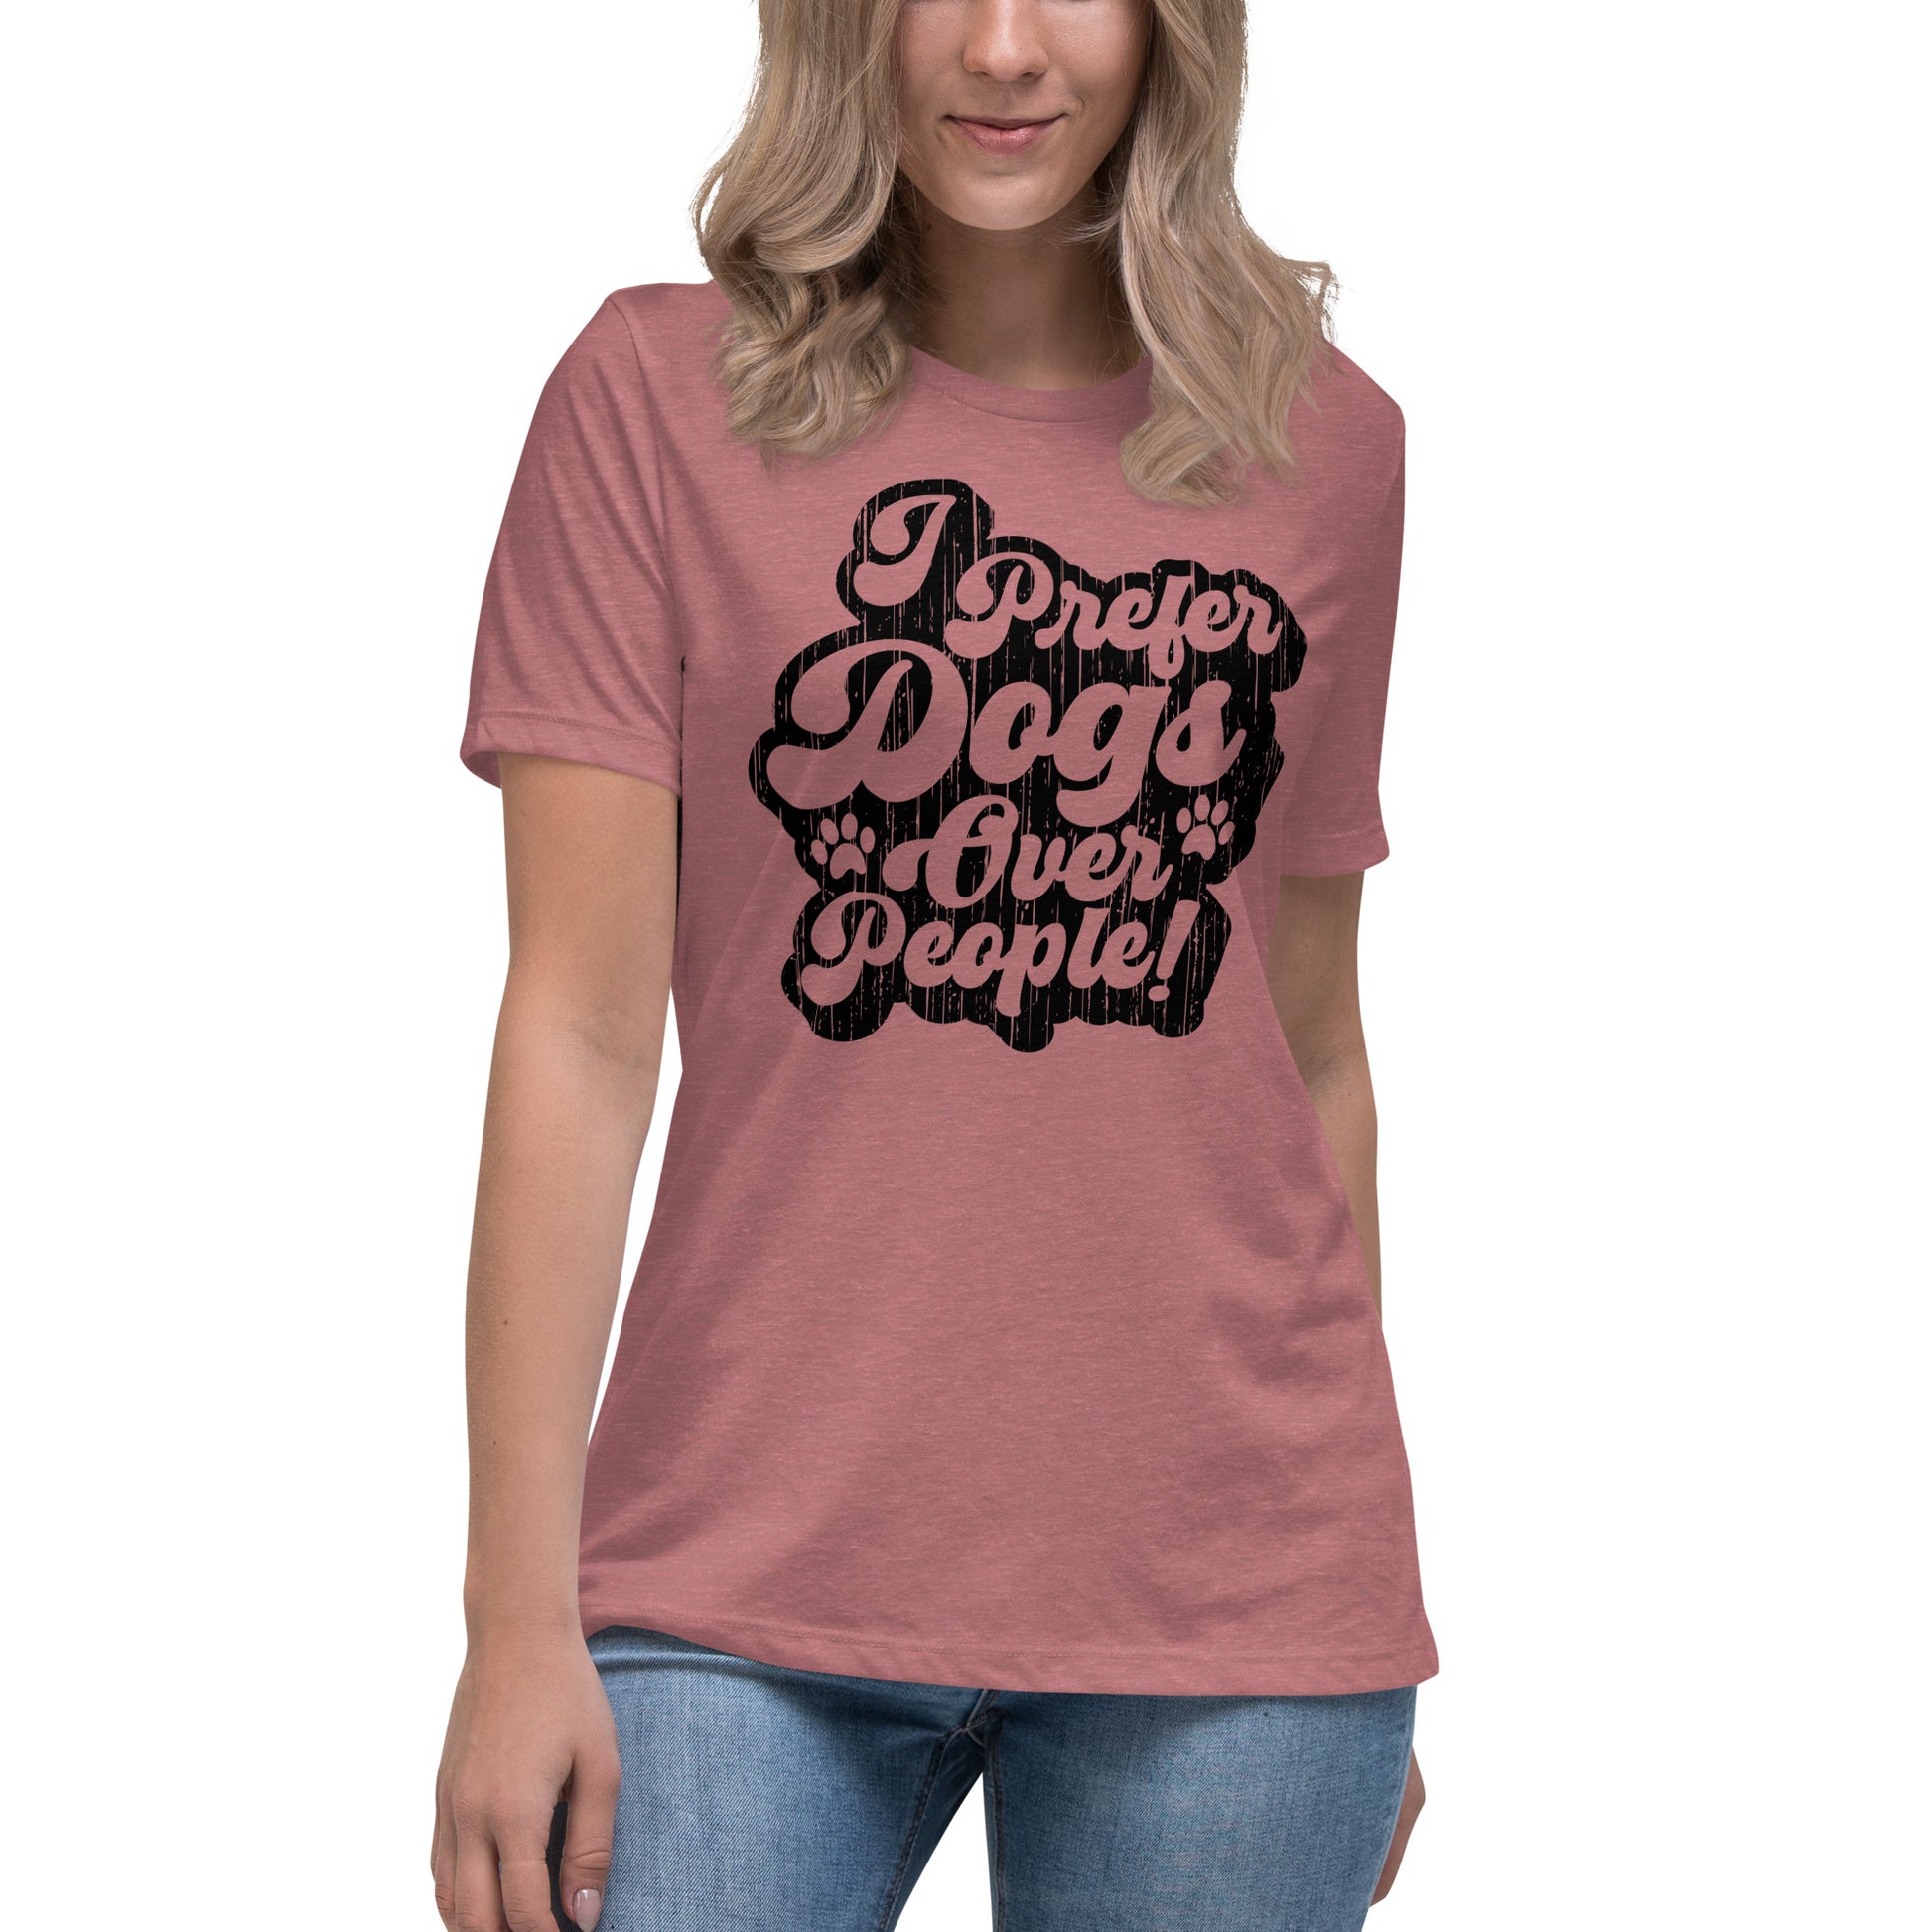 I prefer dogs over people women’s relaxed fit t-shirts by Dog Artistry heather mauve color